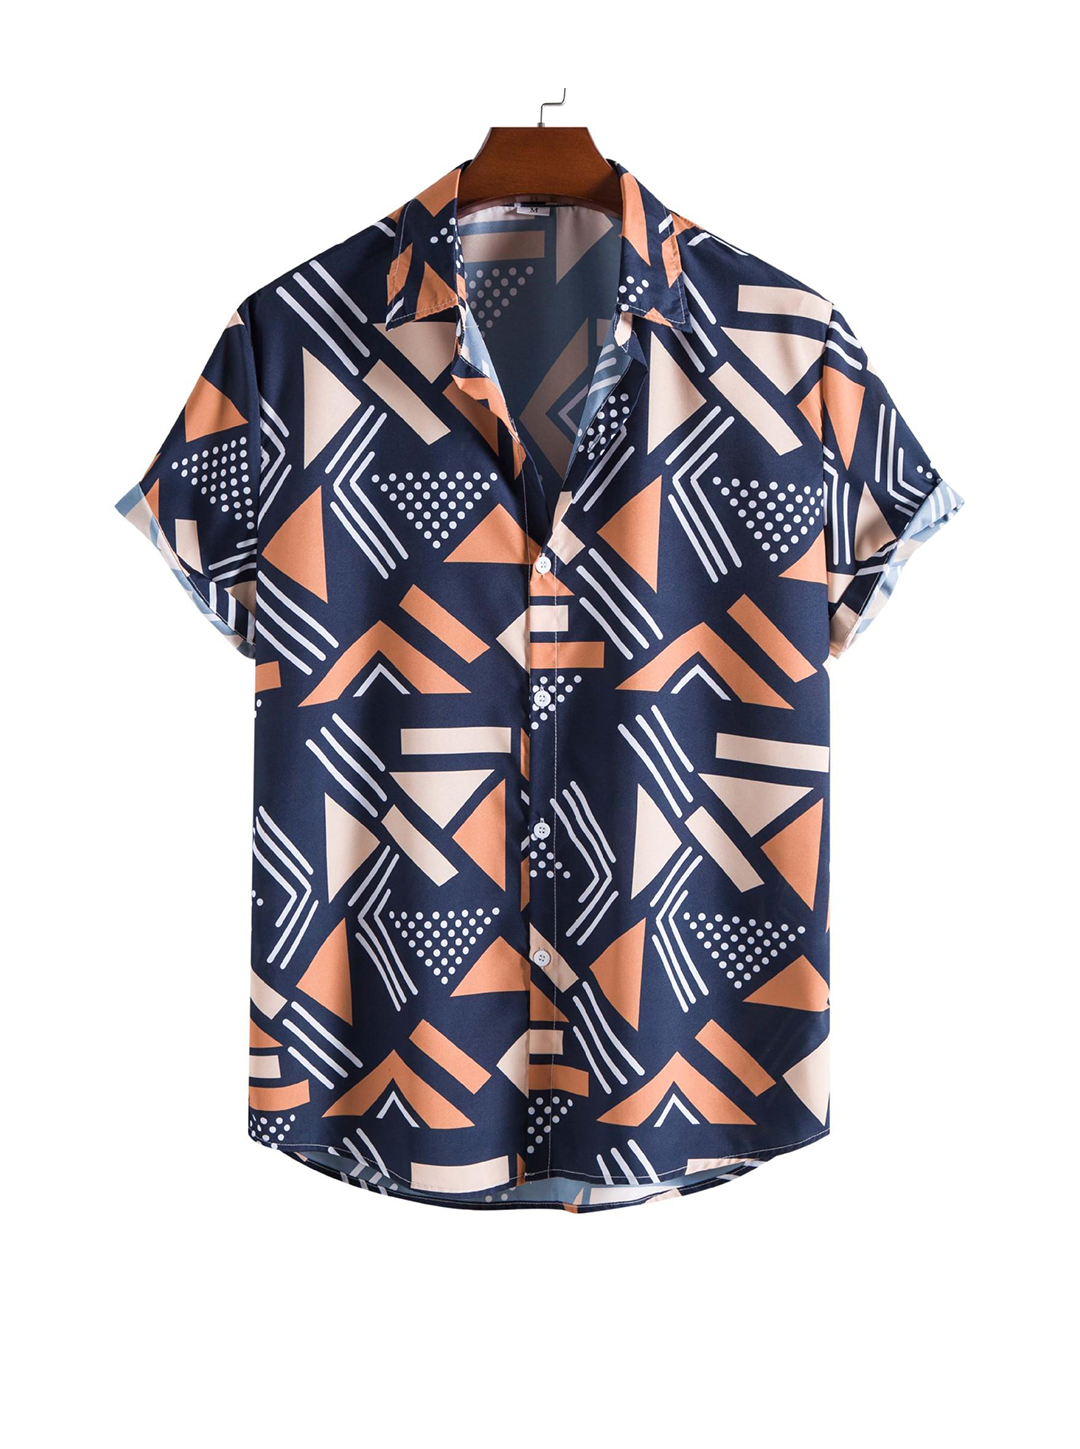 2022 foreign trade new men's fashion trend printing polyester short-sleeved shirt one piece on behalf of